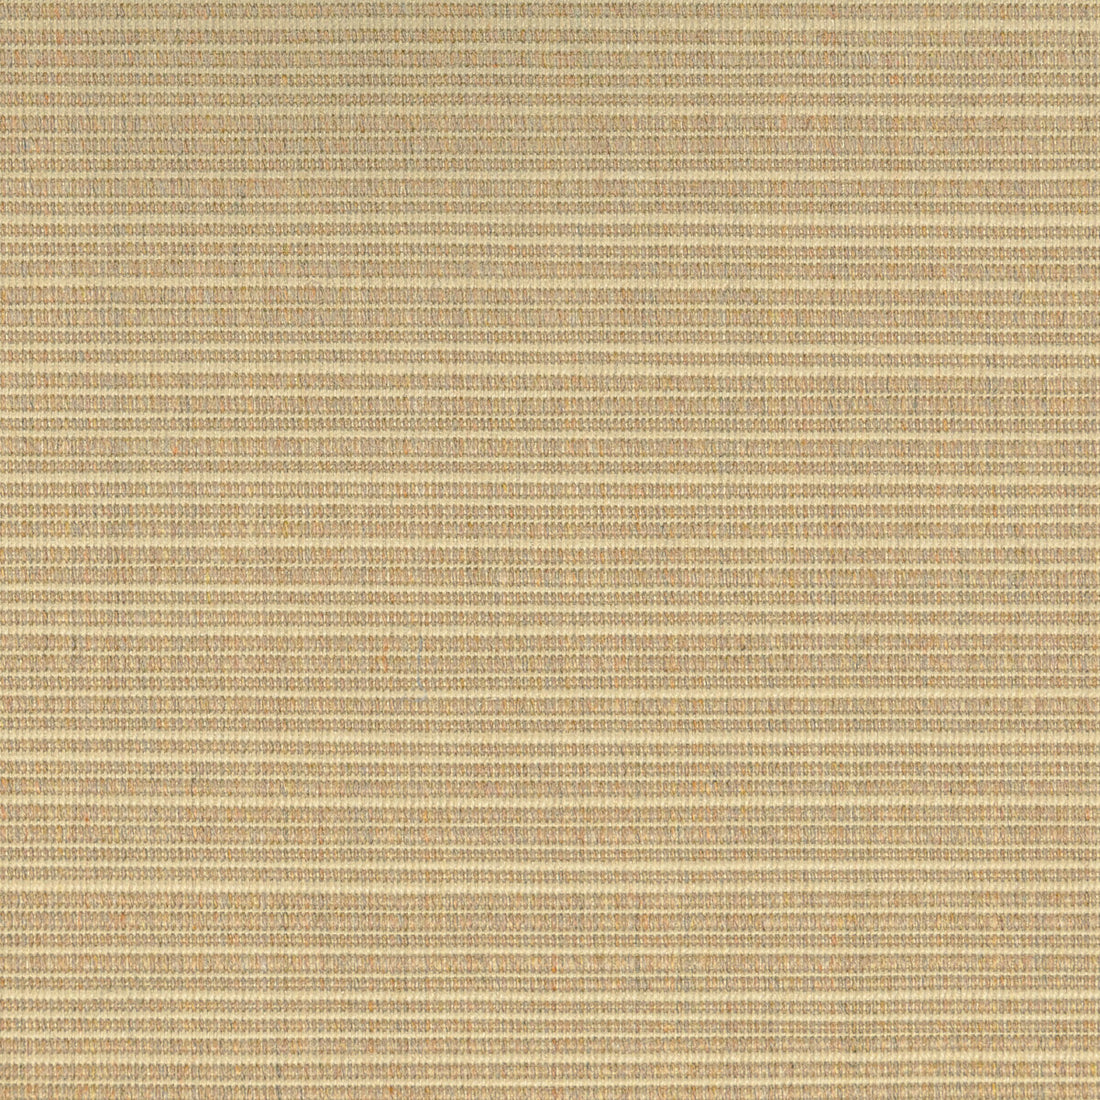 Kravet Basics fabric in 36842-16 color - pattern 36842.16.0 - by Kravet Basics in the Indoor / Outdoor collection